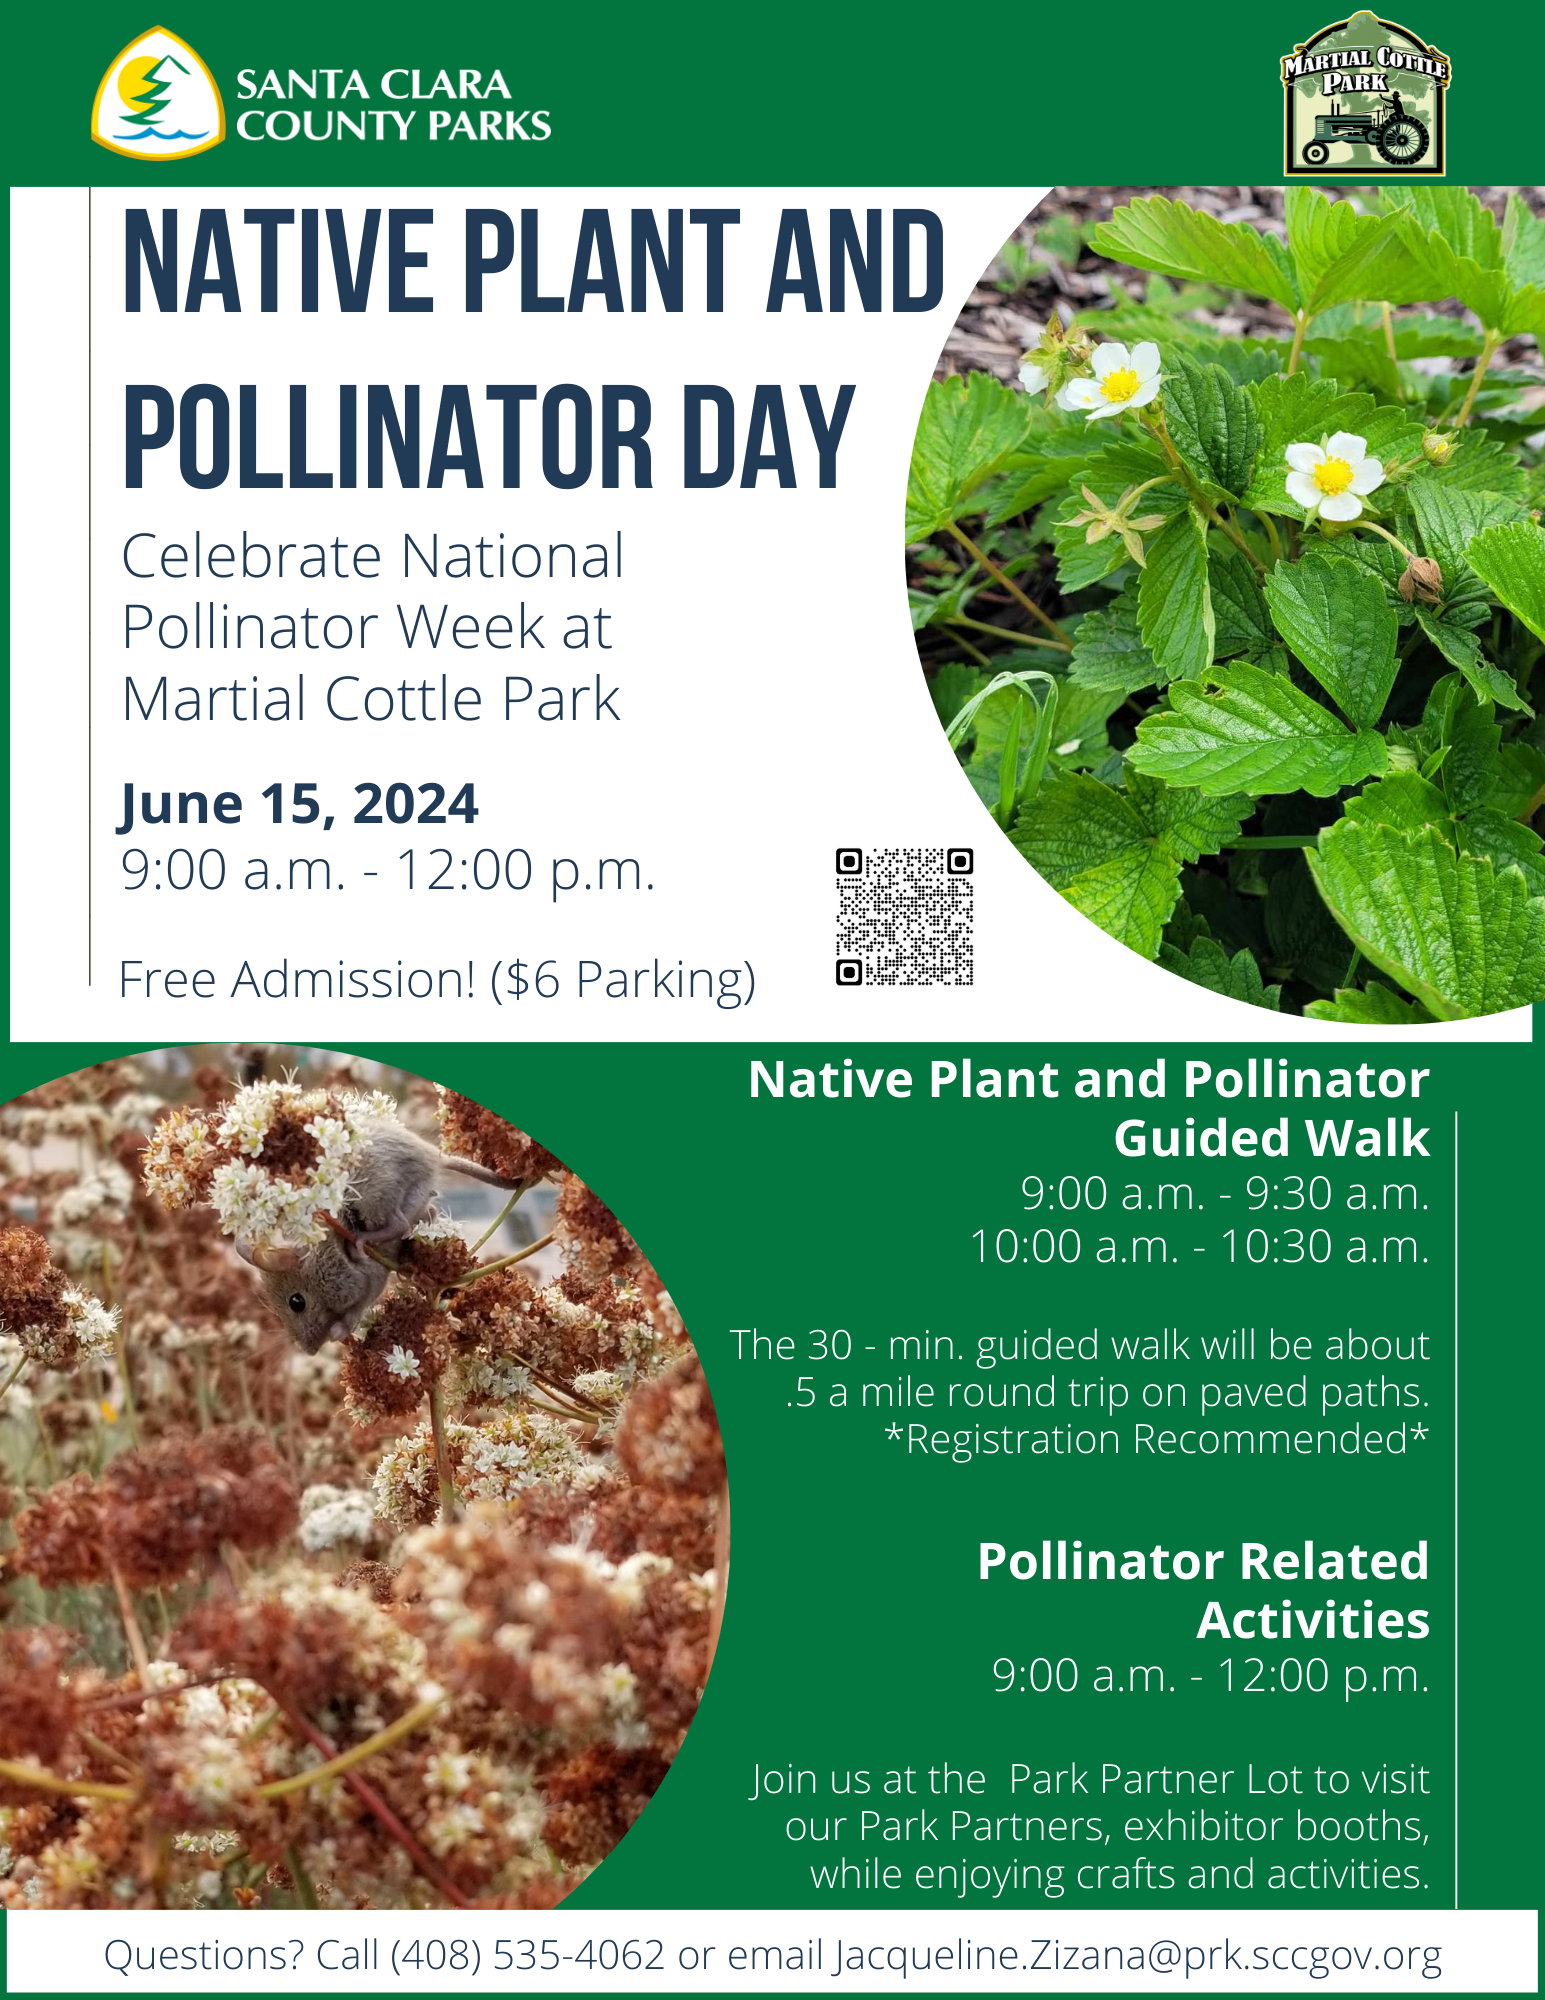 Native Plant and Pollinator Day Flyer 2024, June 15, 2024 9:00am-12:00pm